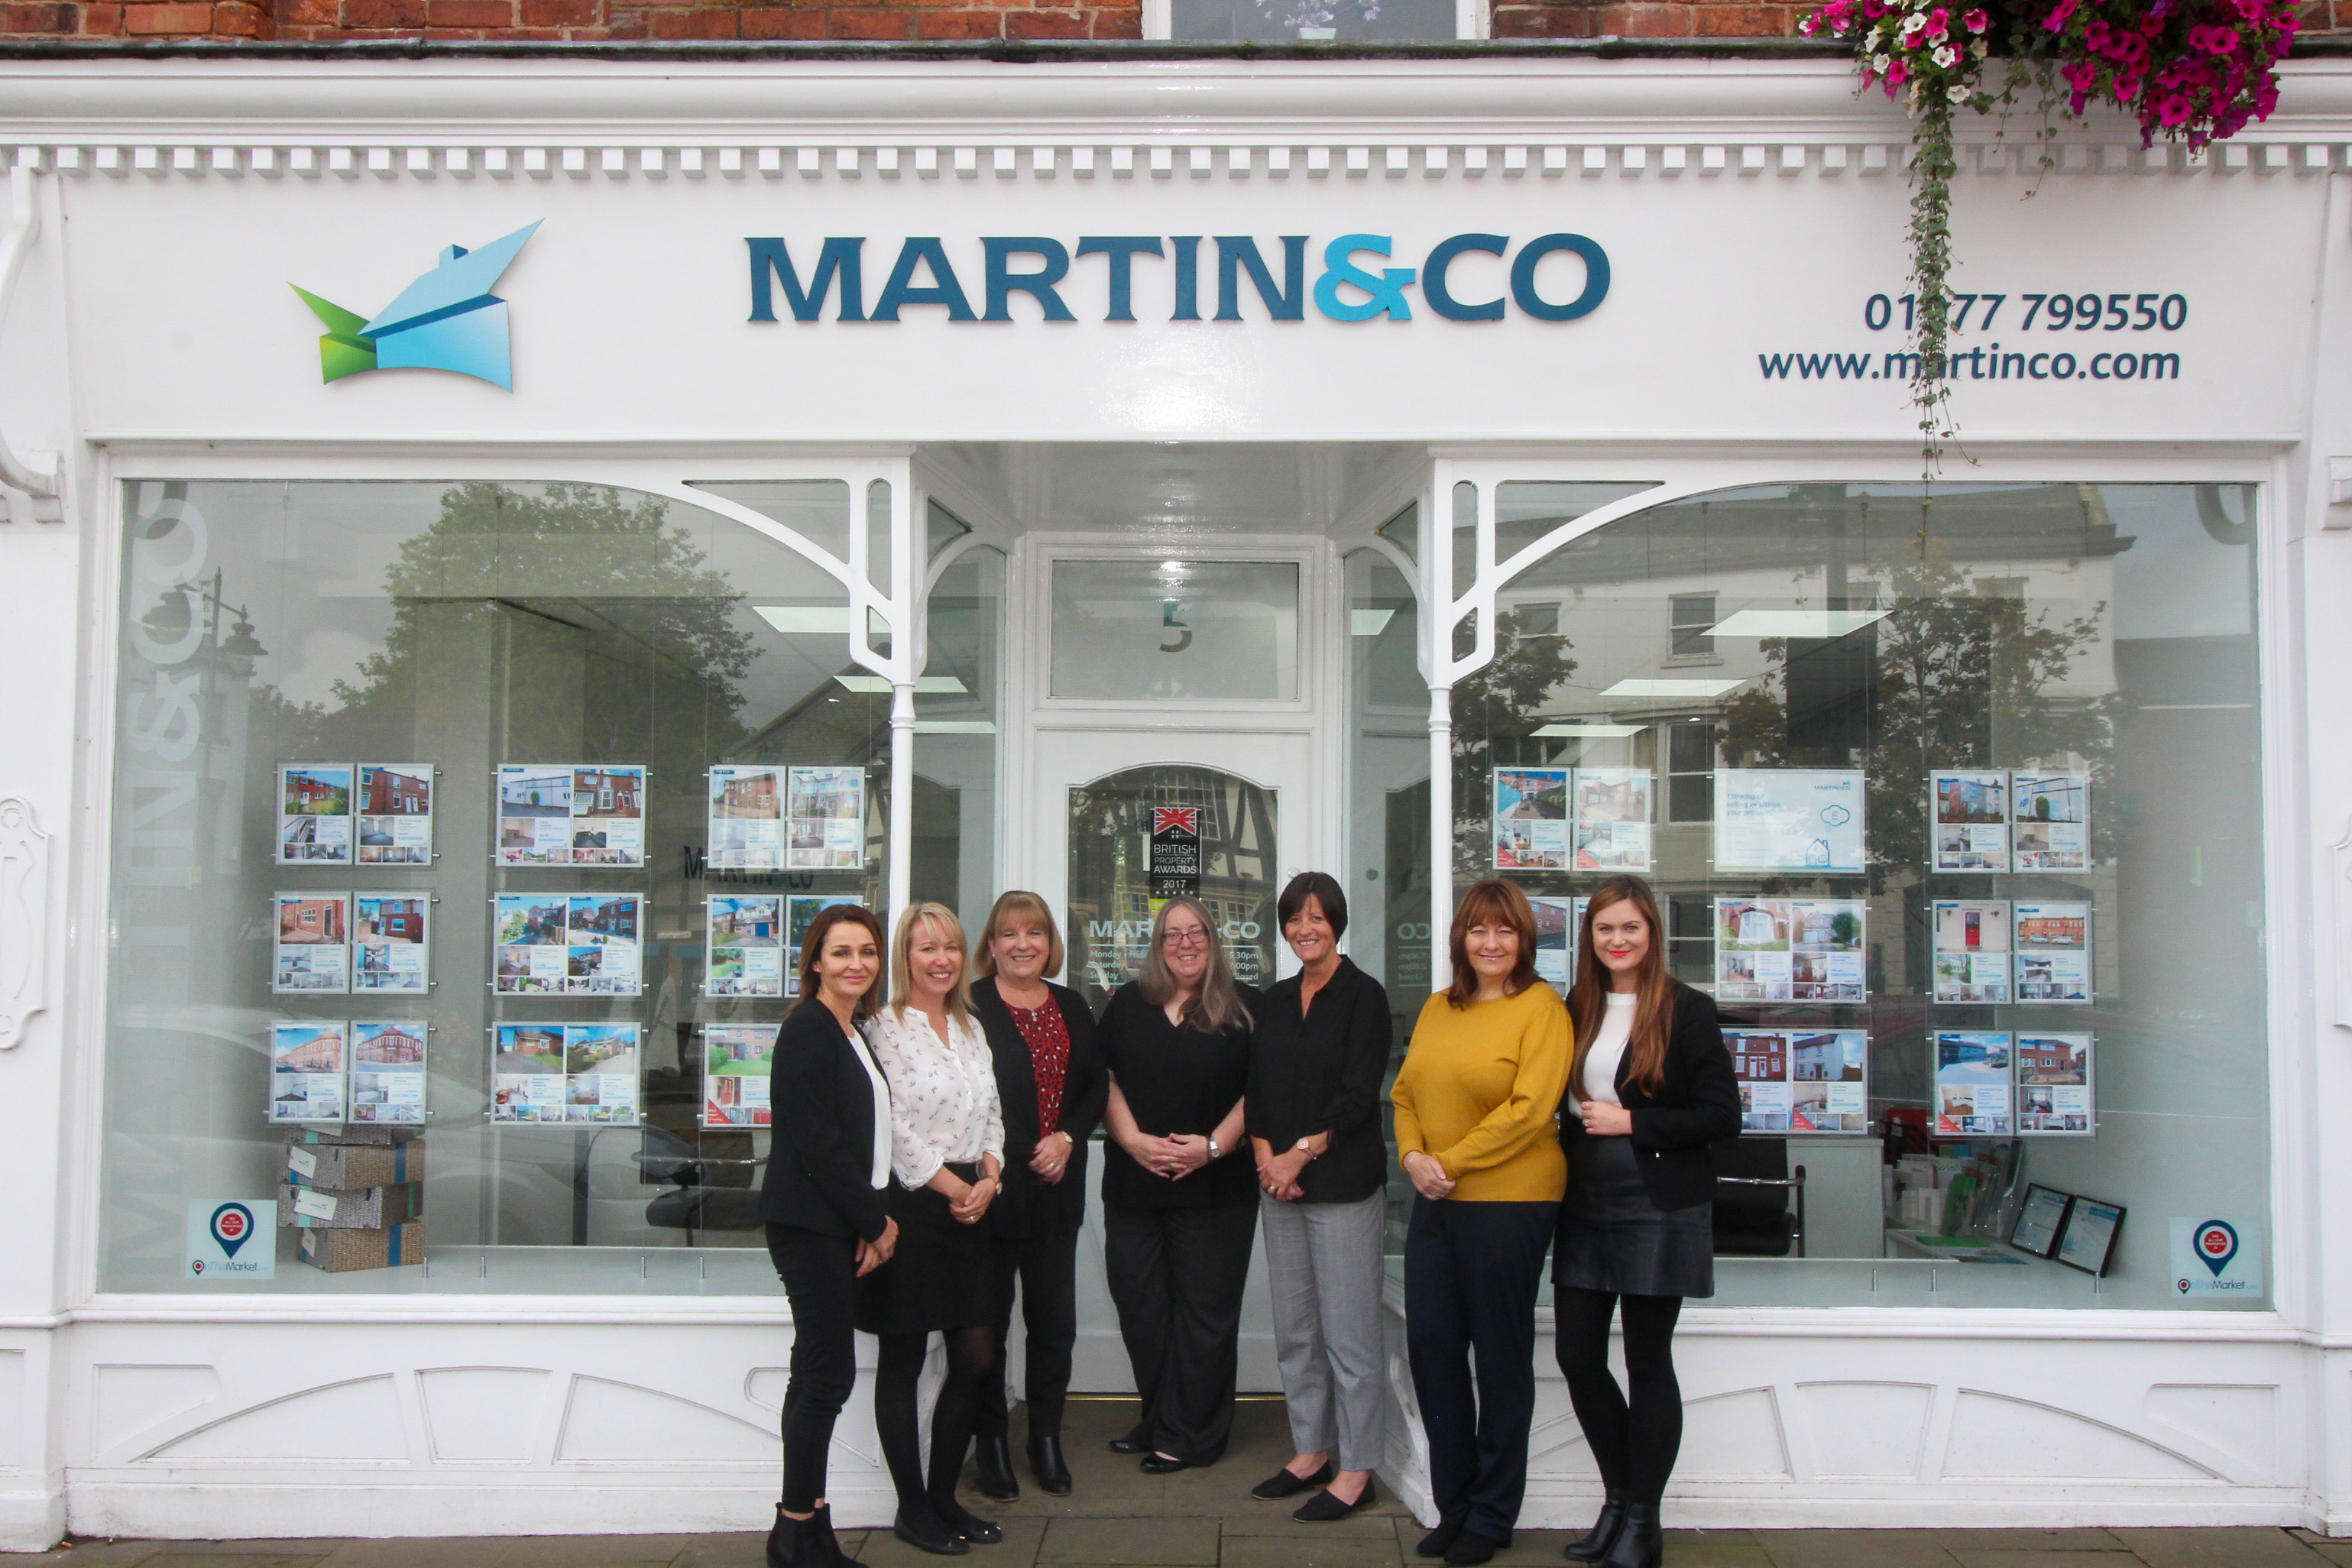 Martin & Co Pontefract Lettings & Estate Agents - Pontefract, West Yorkshire WF8 1AN - 01977 799550 | ShowMeLocal.com